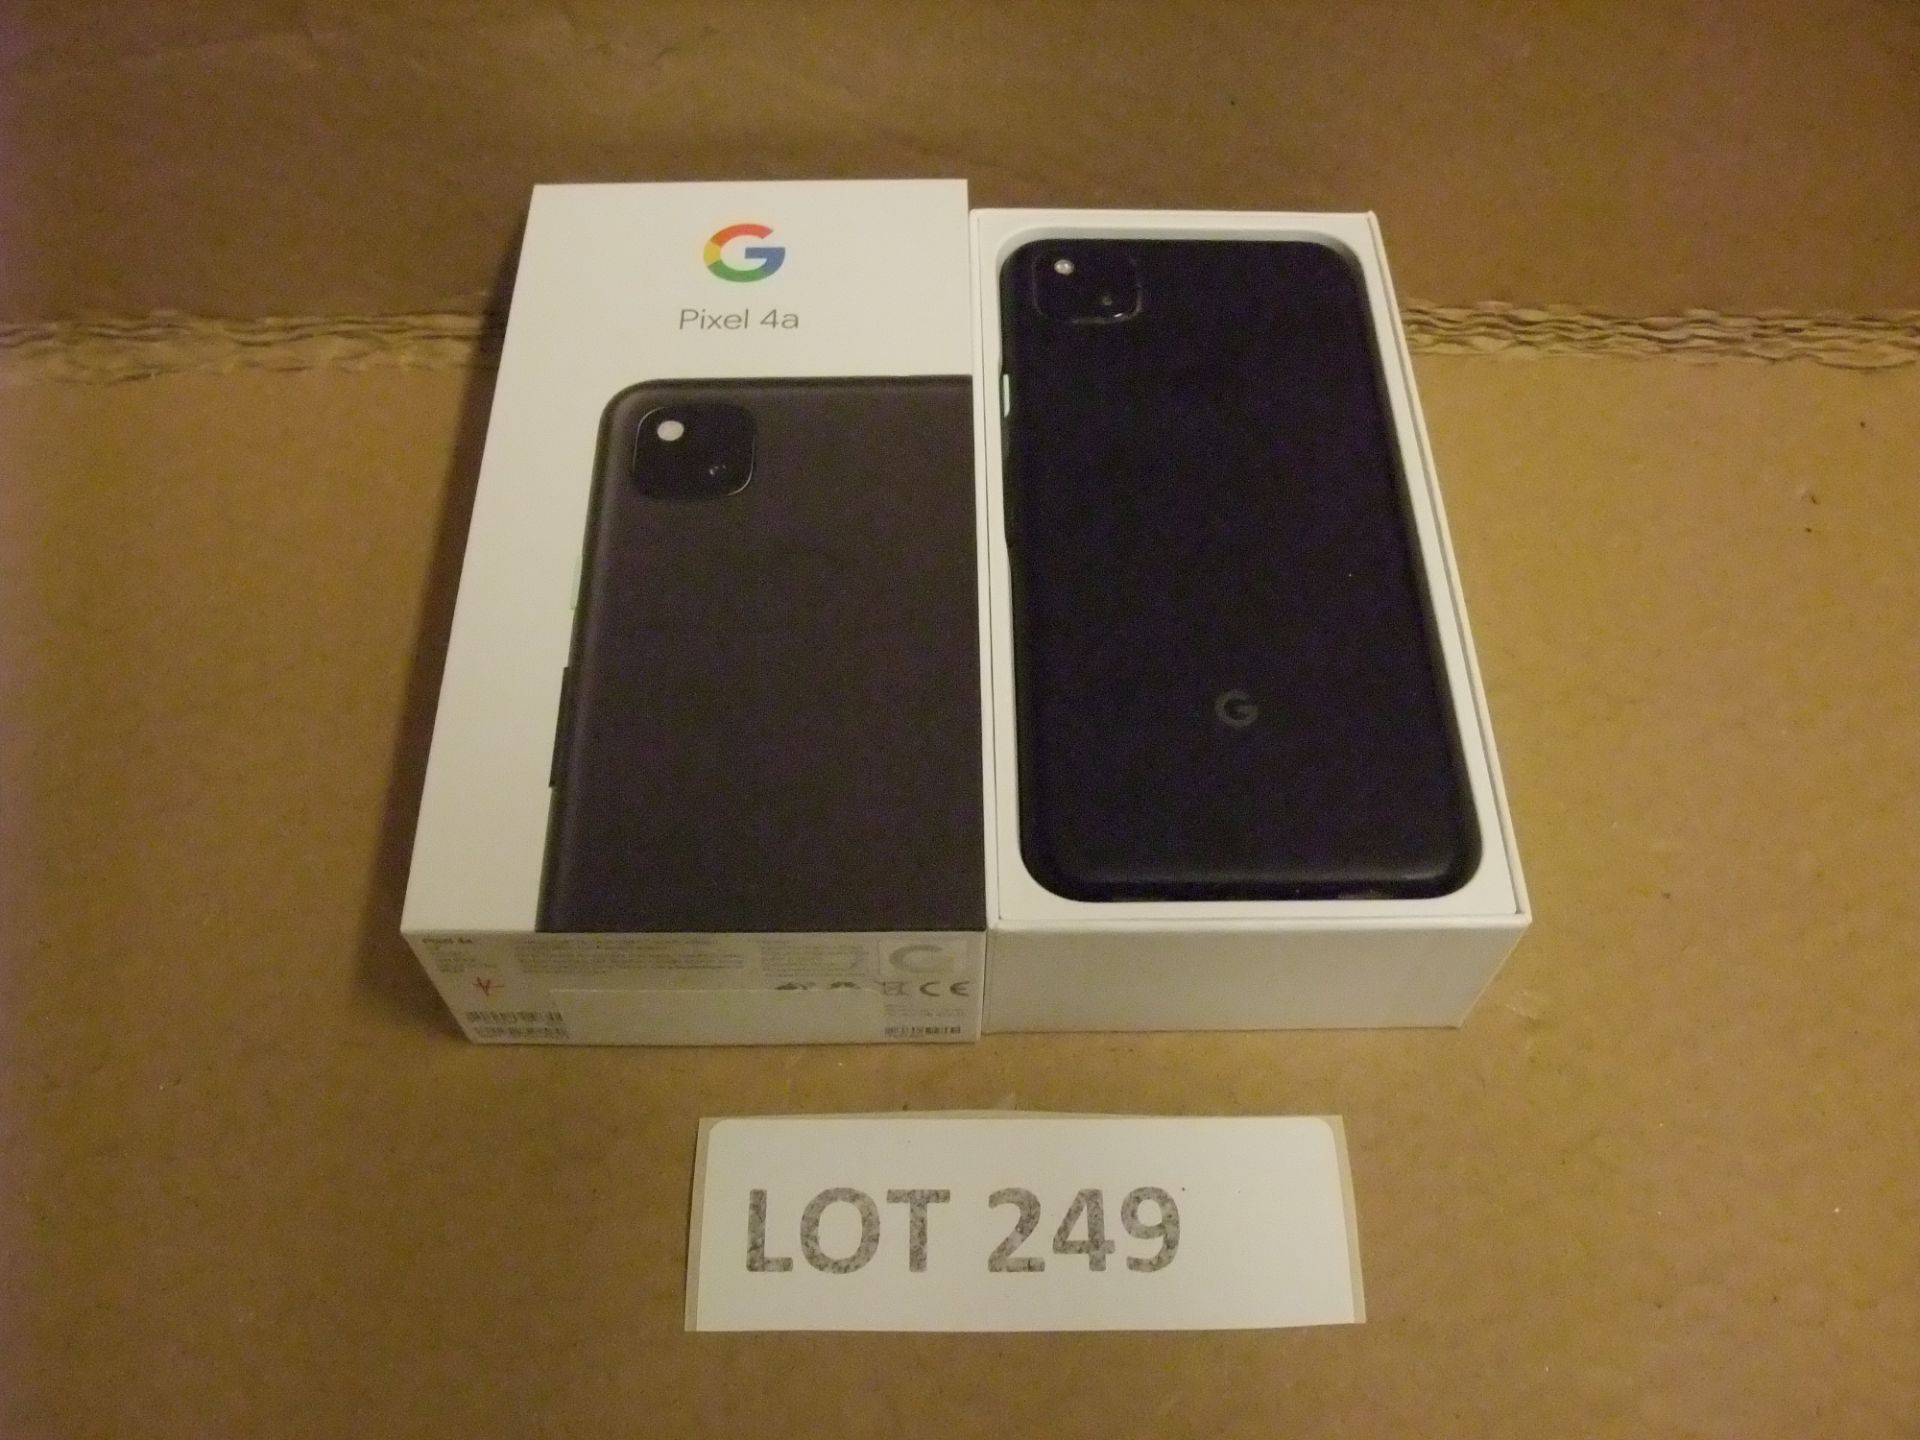 Google Pixel 4a (black) Android Phone - 128GbPlease read the following important notes:- All lots - Image 2 of 4